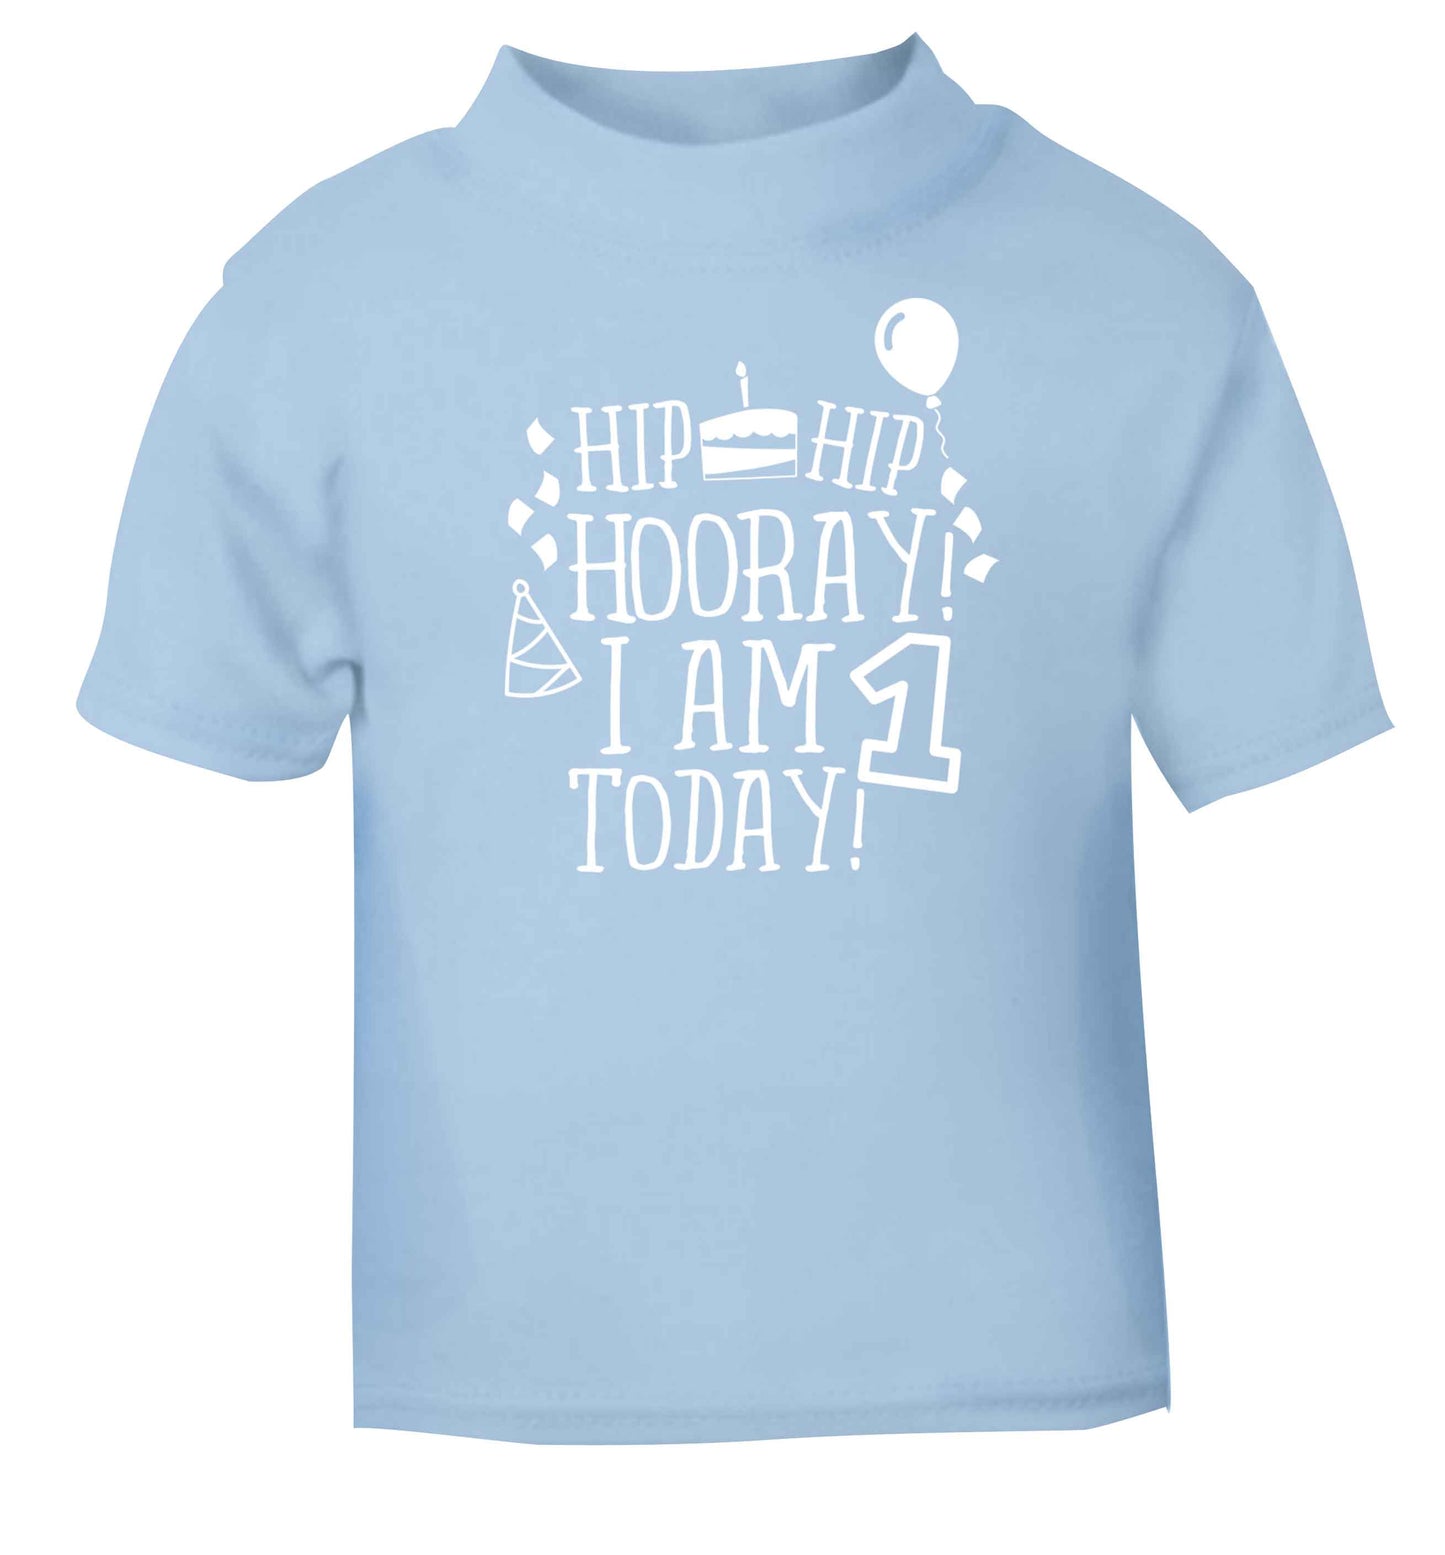 I am One Today light blue baby toddler Tshirt 2 Years